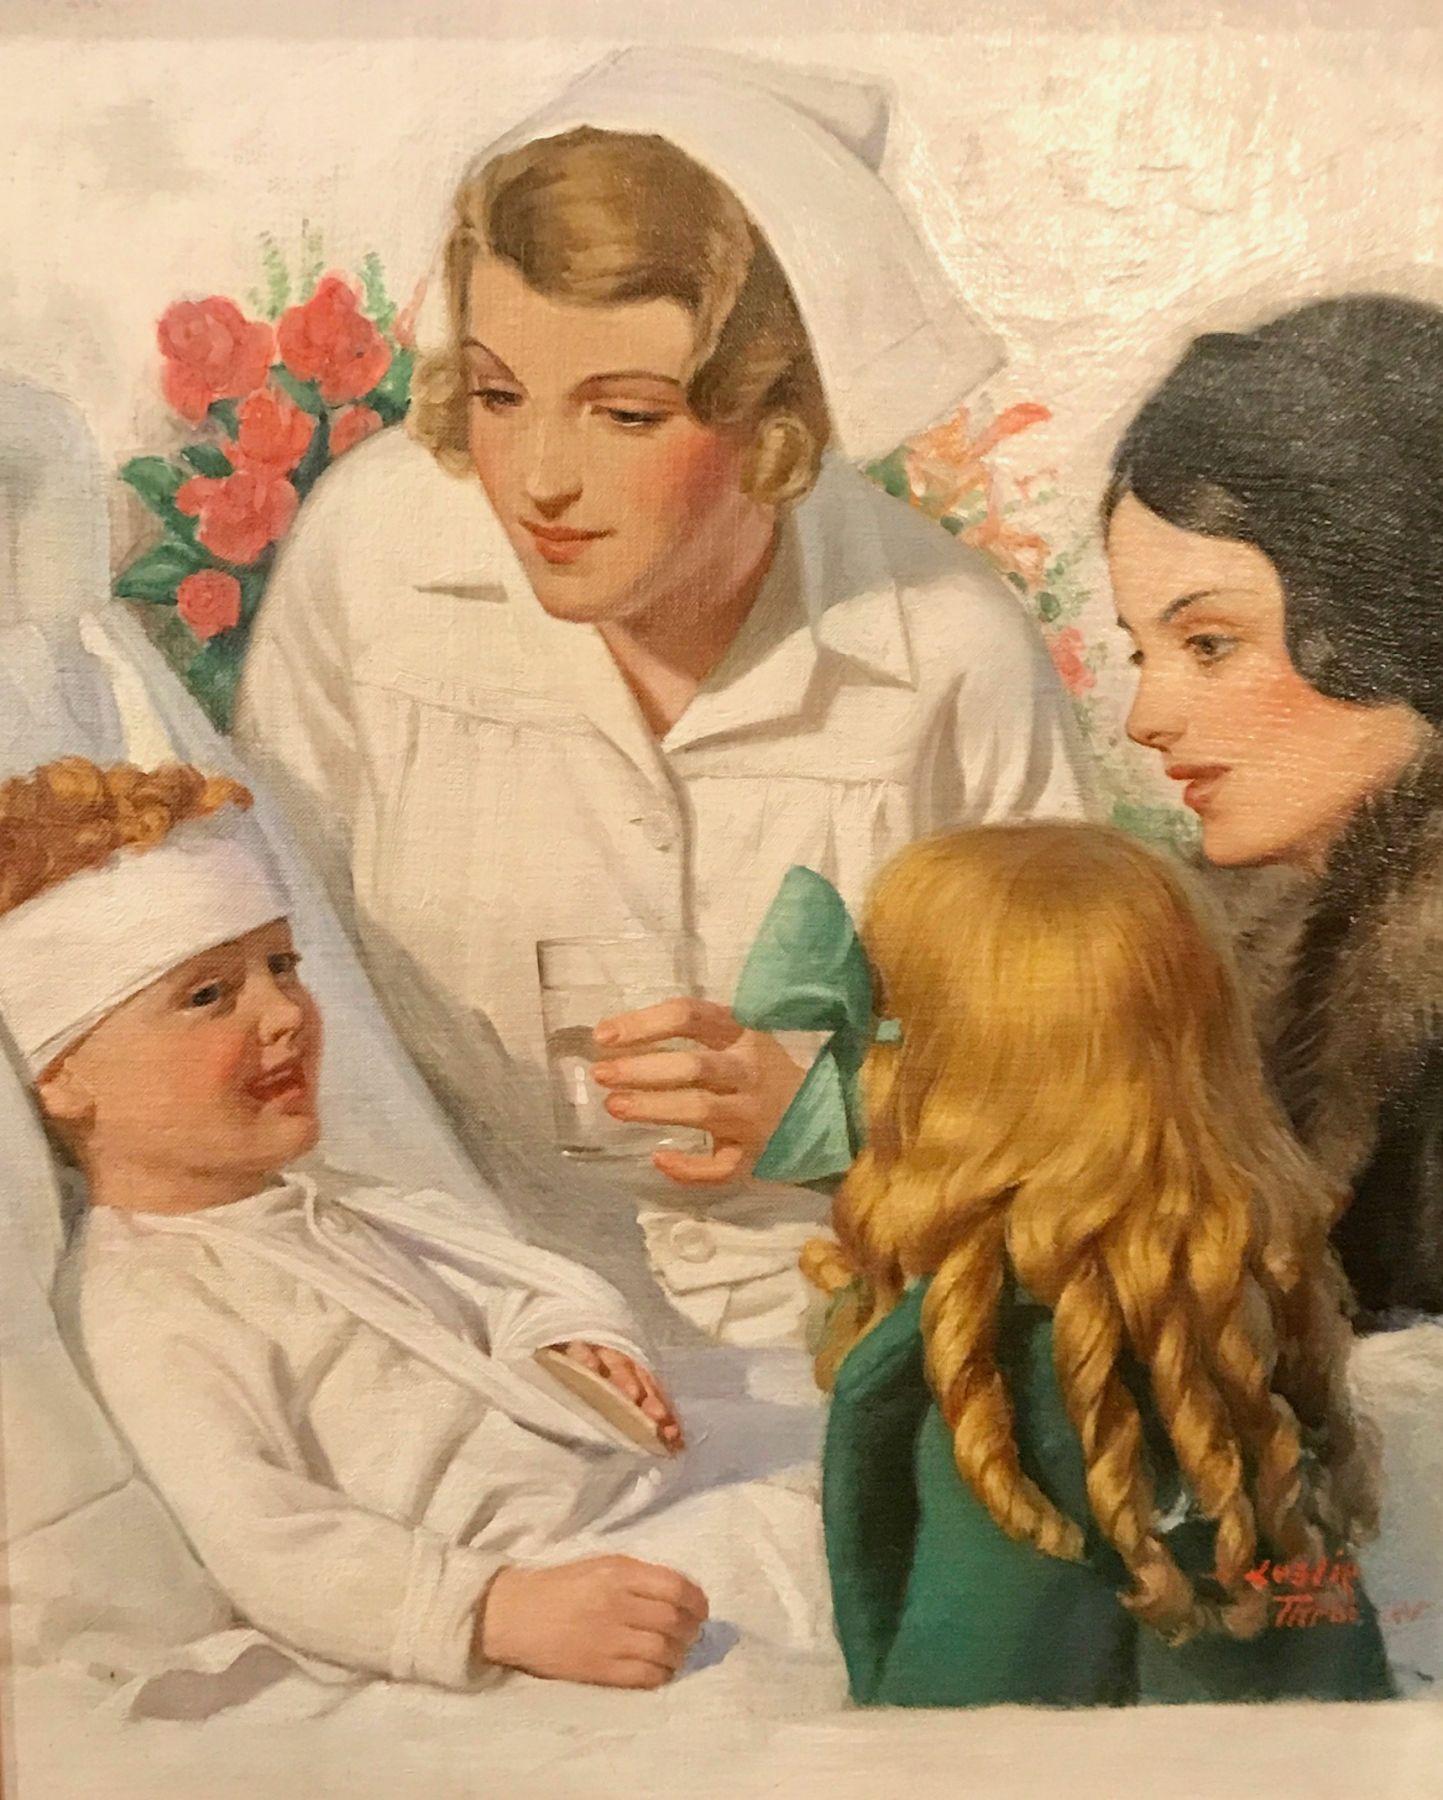 Leslie Thrasher Figurative Painting - Child in Hospital, Liberty Magazine Cover, 1931